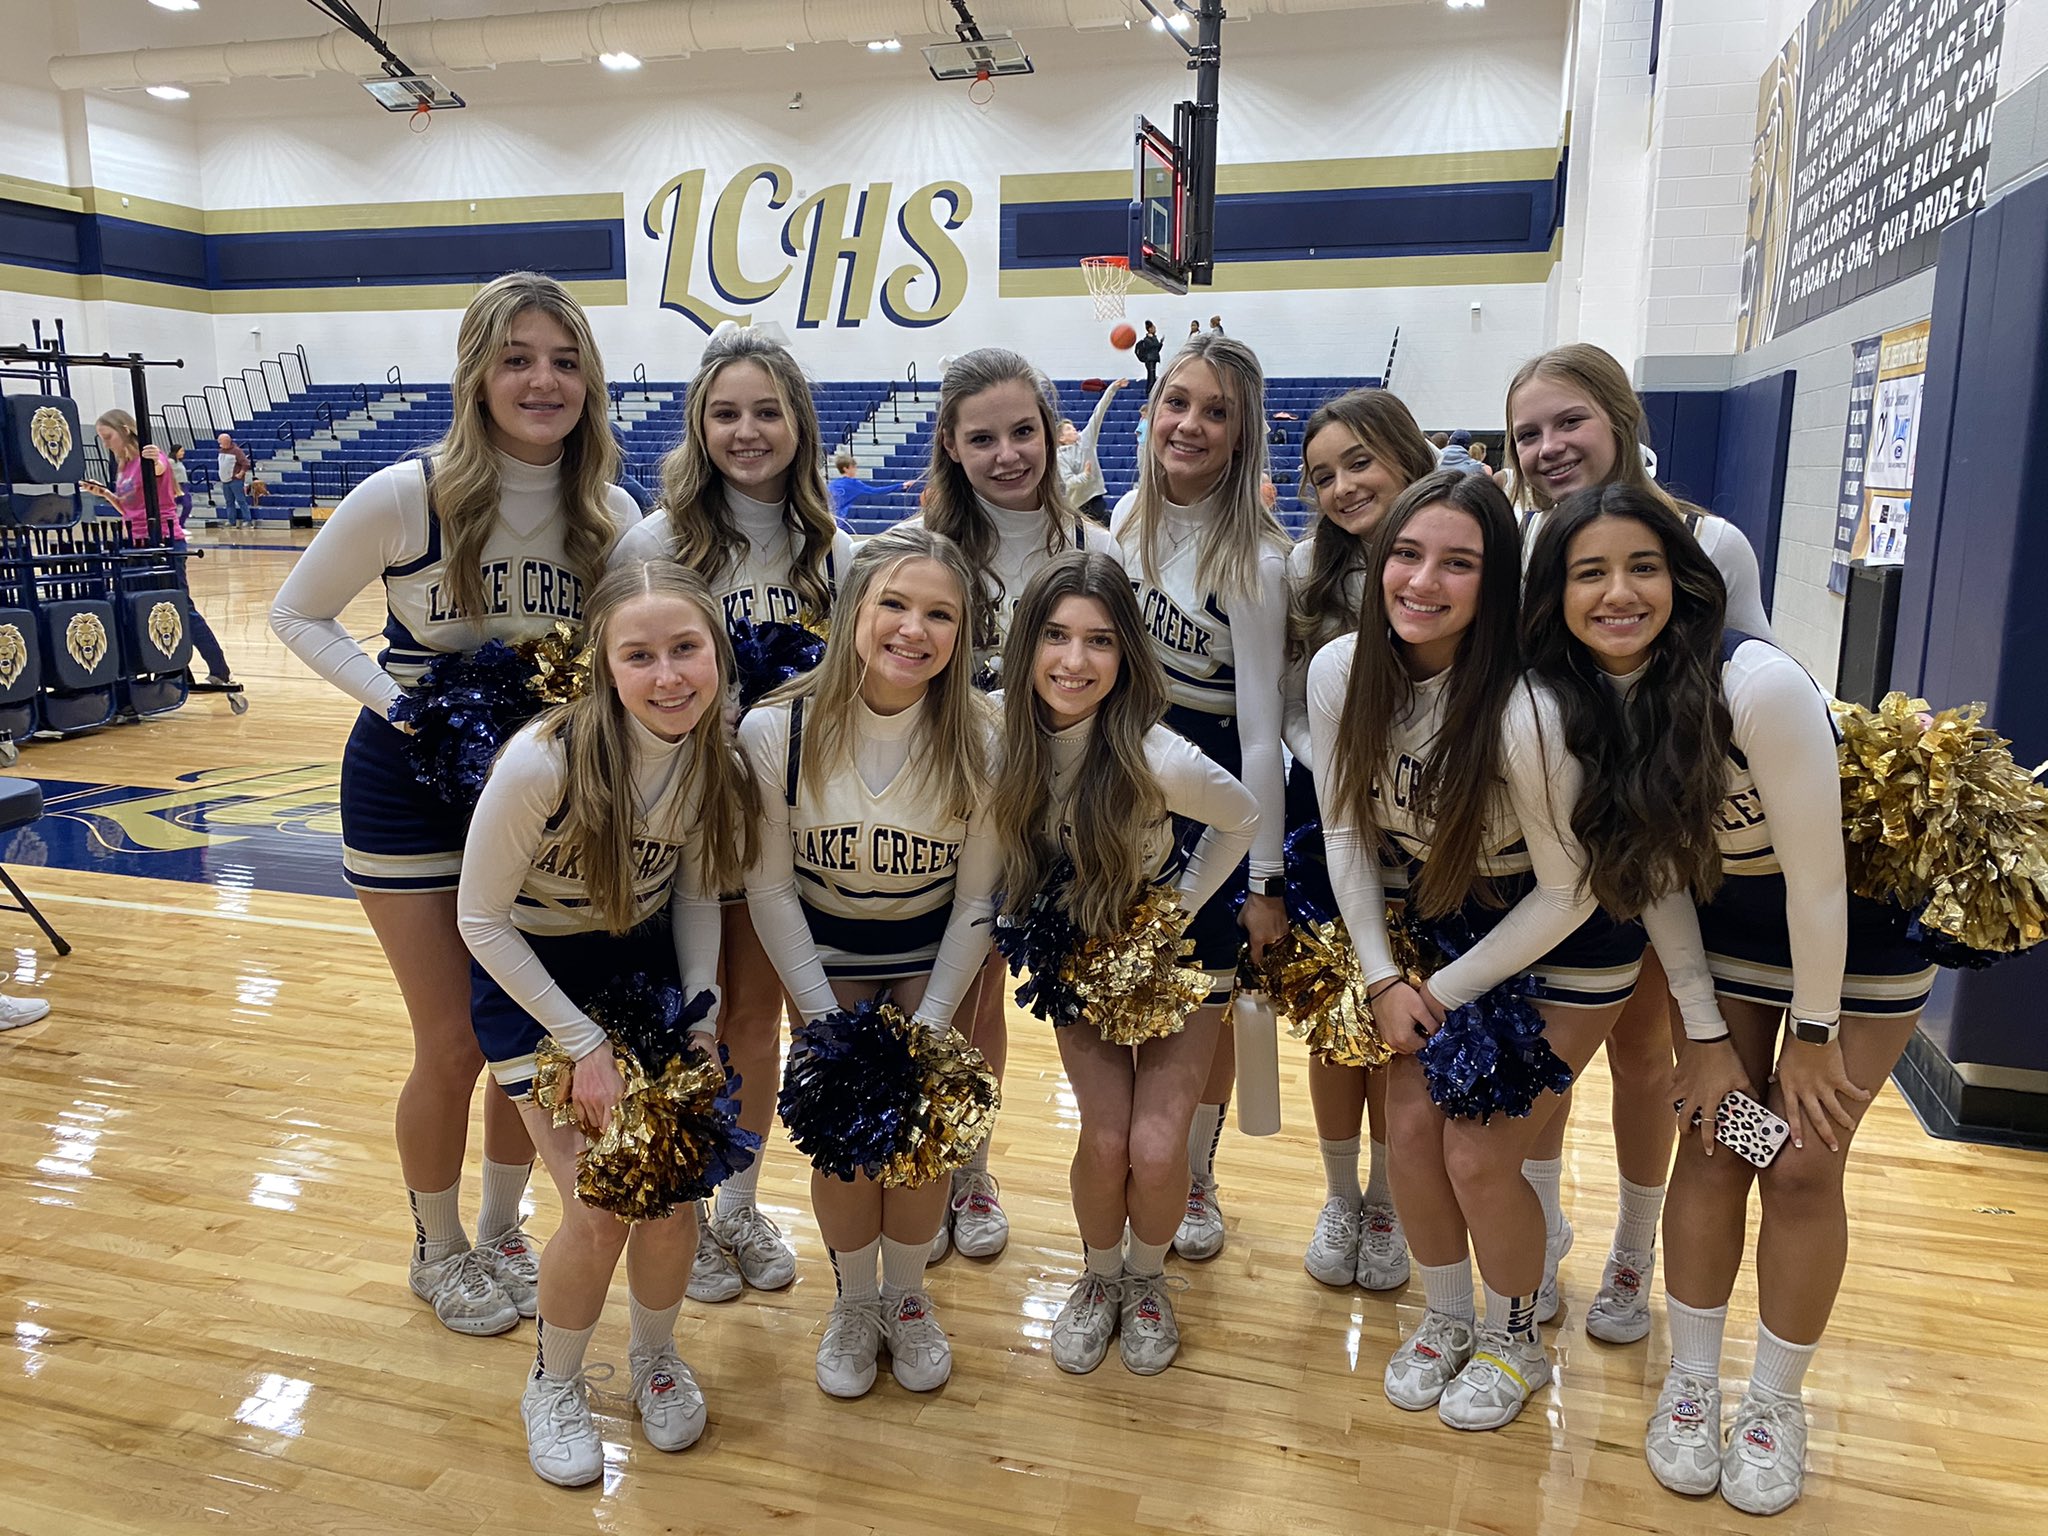 Lake Creek HS Cheer on X: A great win @LakeCreekGBB last night! We love  cheering for our Lions!! @Miller_LCHS @FlemingInTheDen @giffwhitehead  @StoweFoSho @DuaneMcFadden2 @LakeCreekHS  / X